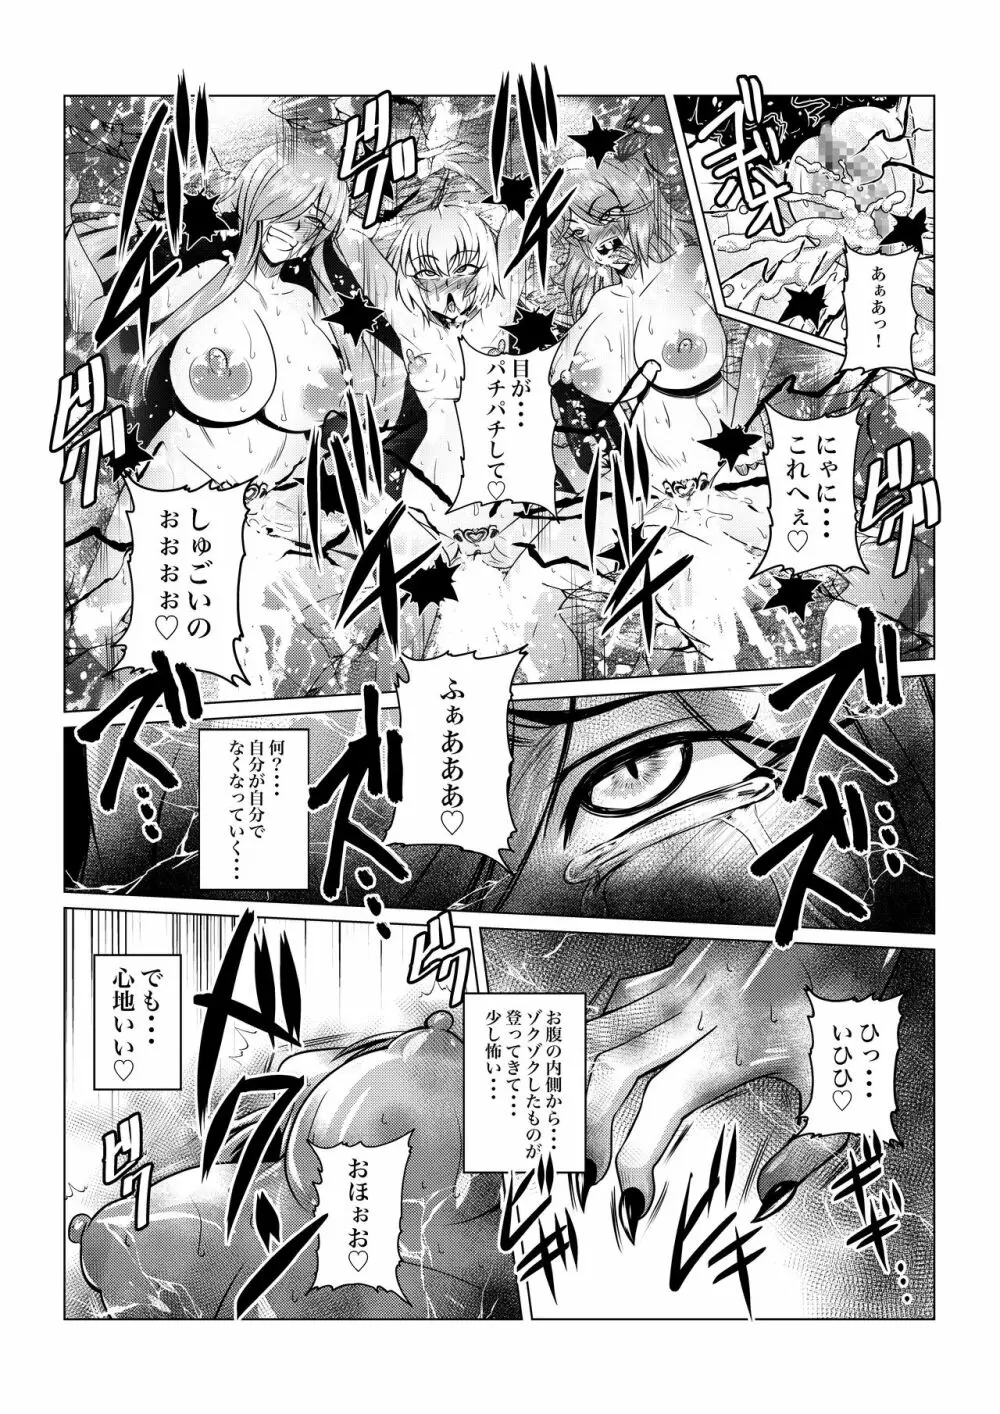 Tales Of DarkSide〜三散華〜 - page22